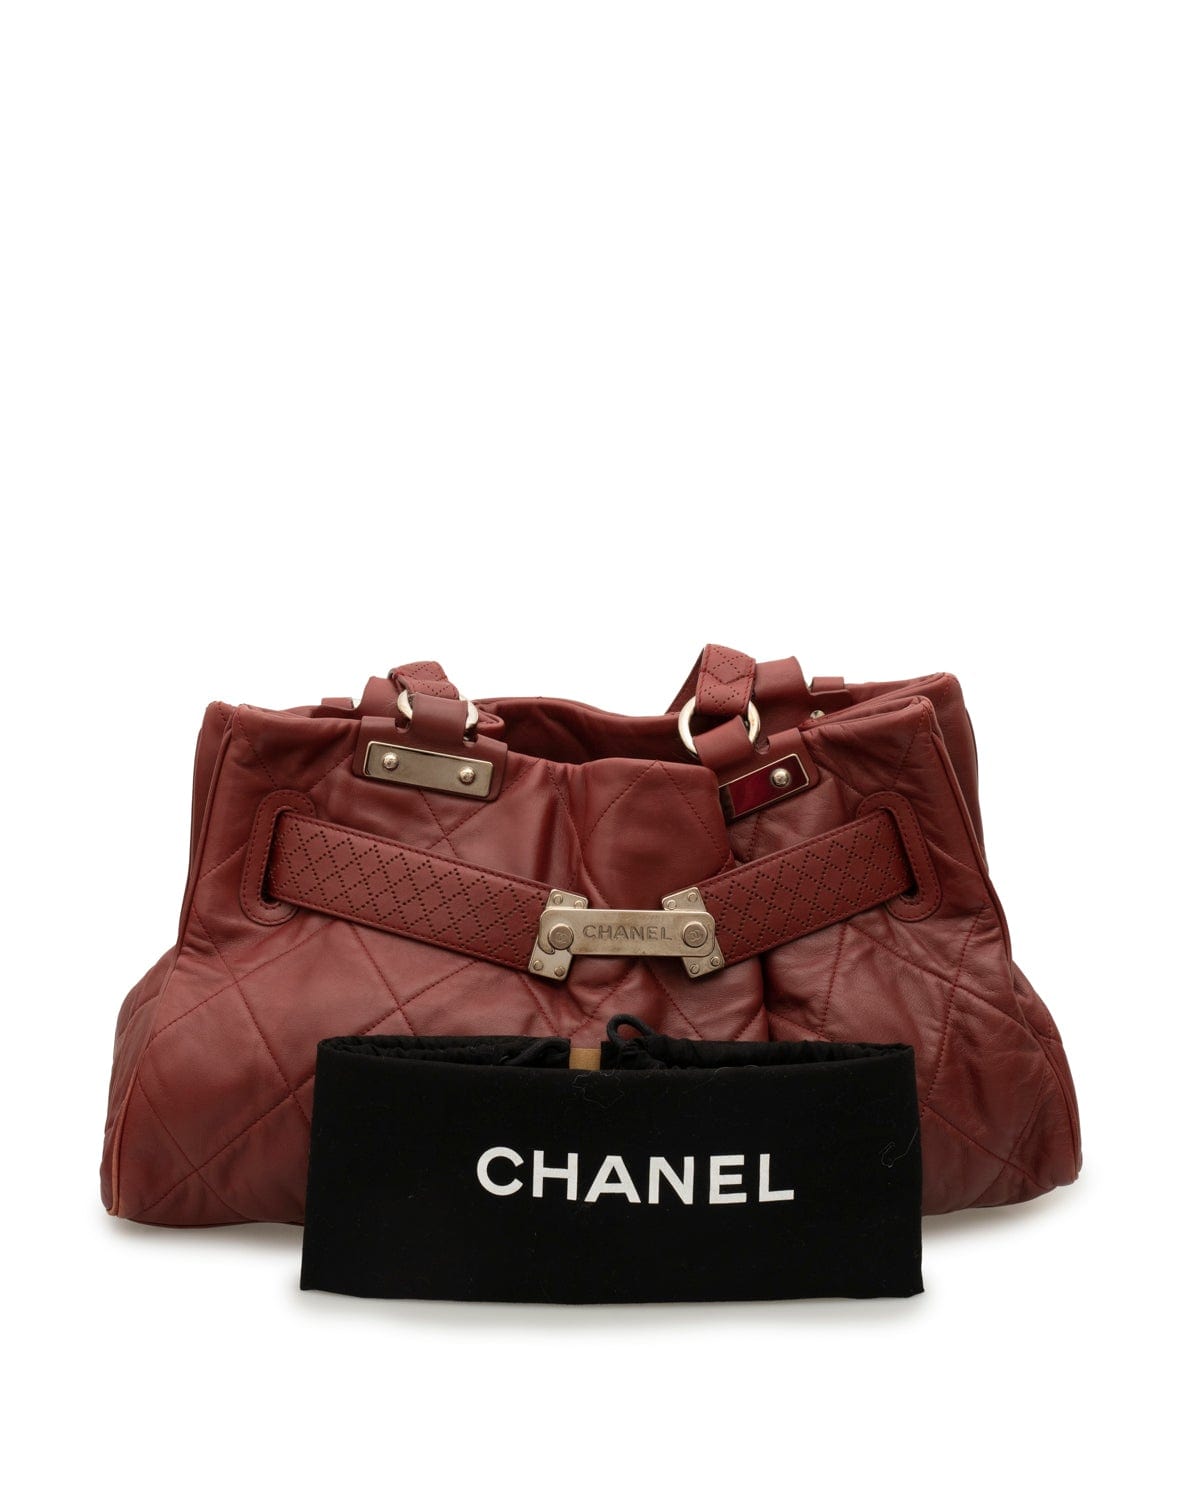 Chanel Chanel Burgundy Lambskin Leather Soft Tote Bag - AGL1518